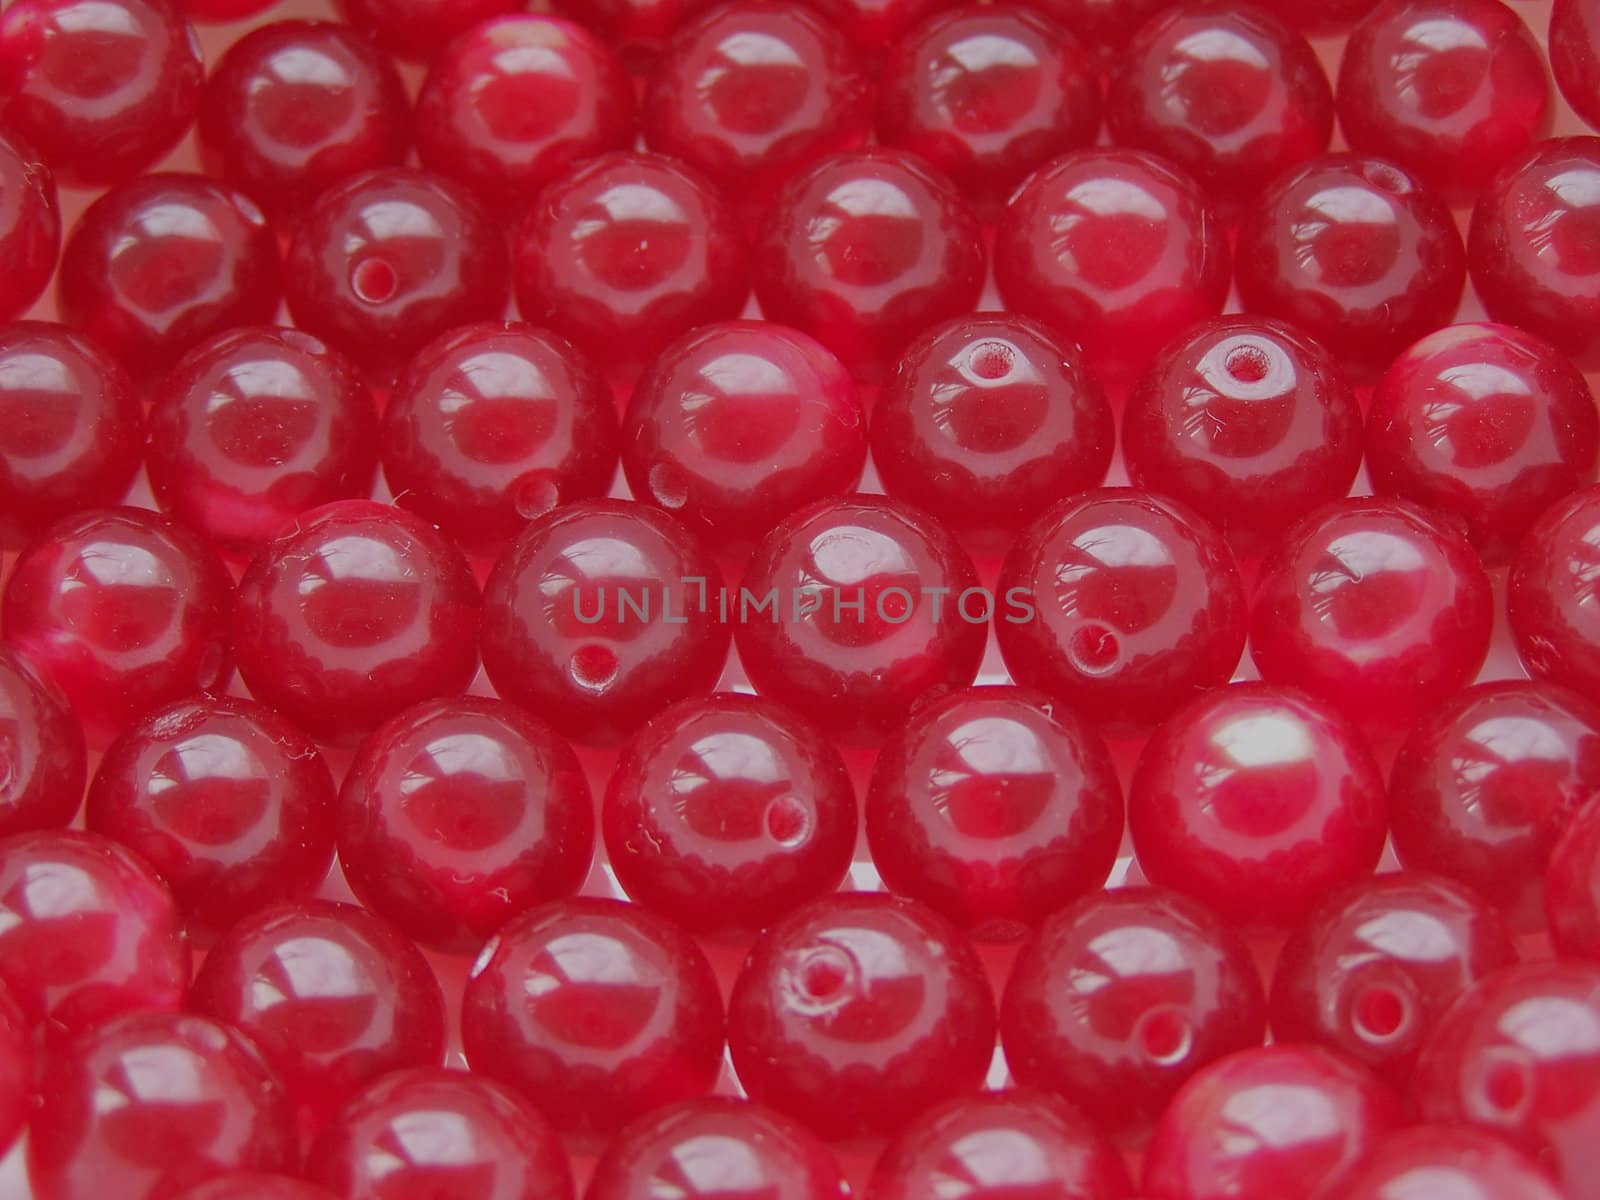 Close up of the many red beads for the background.